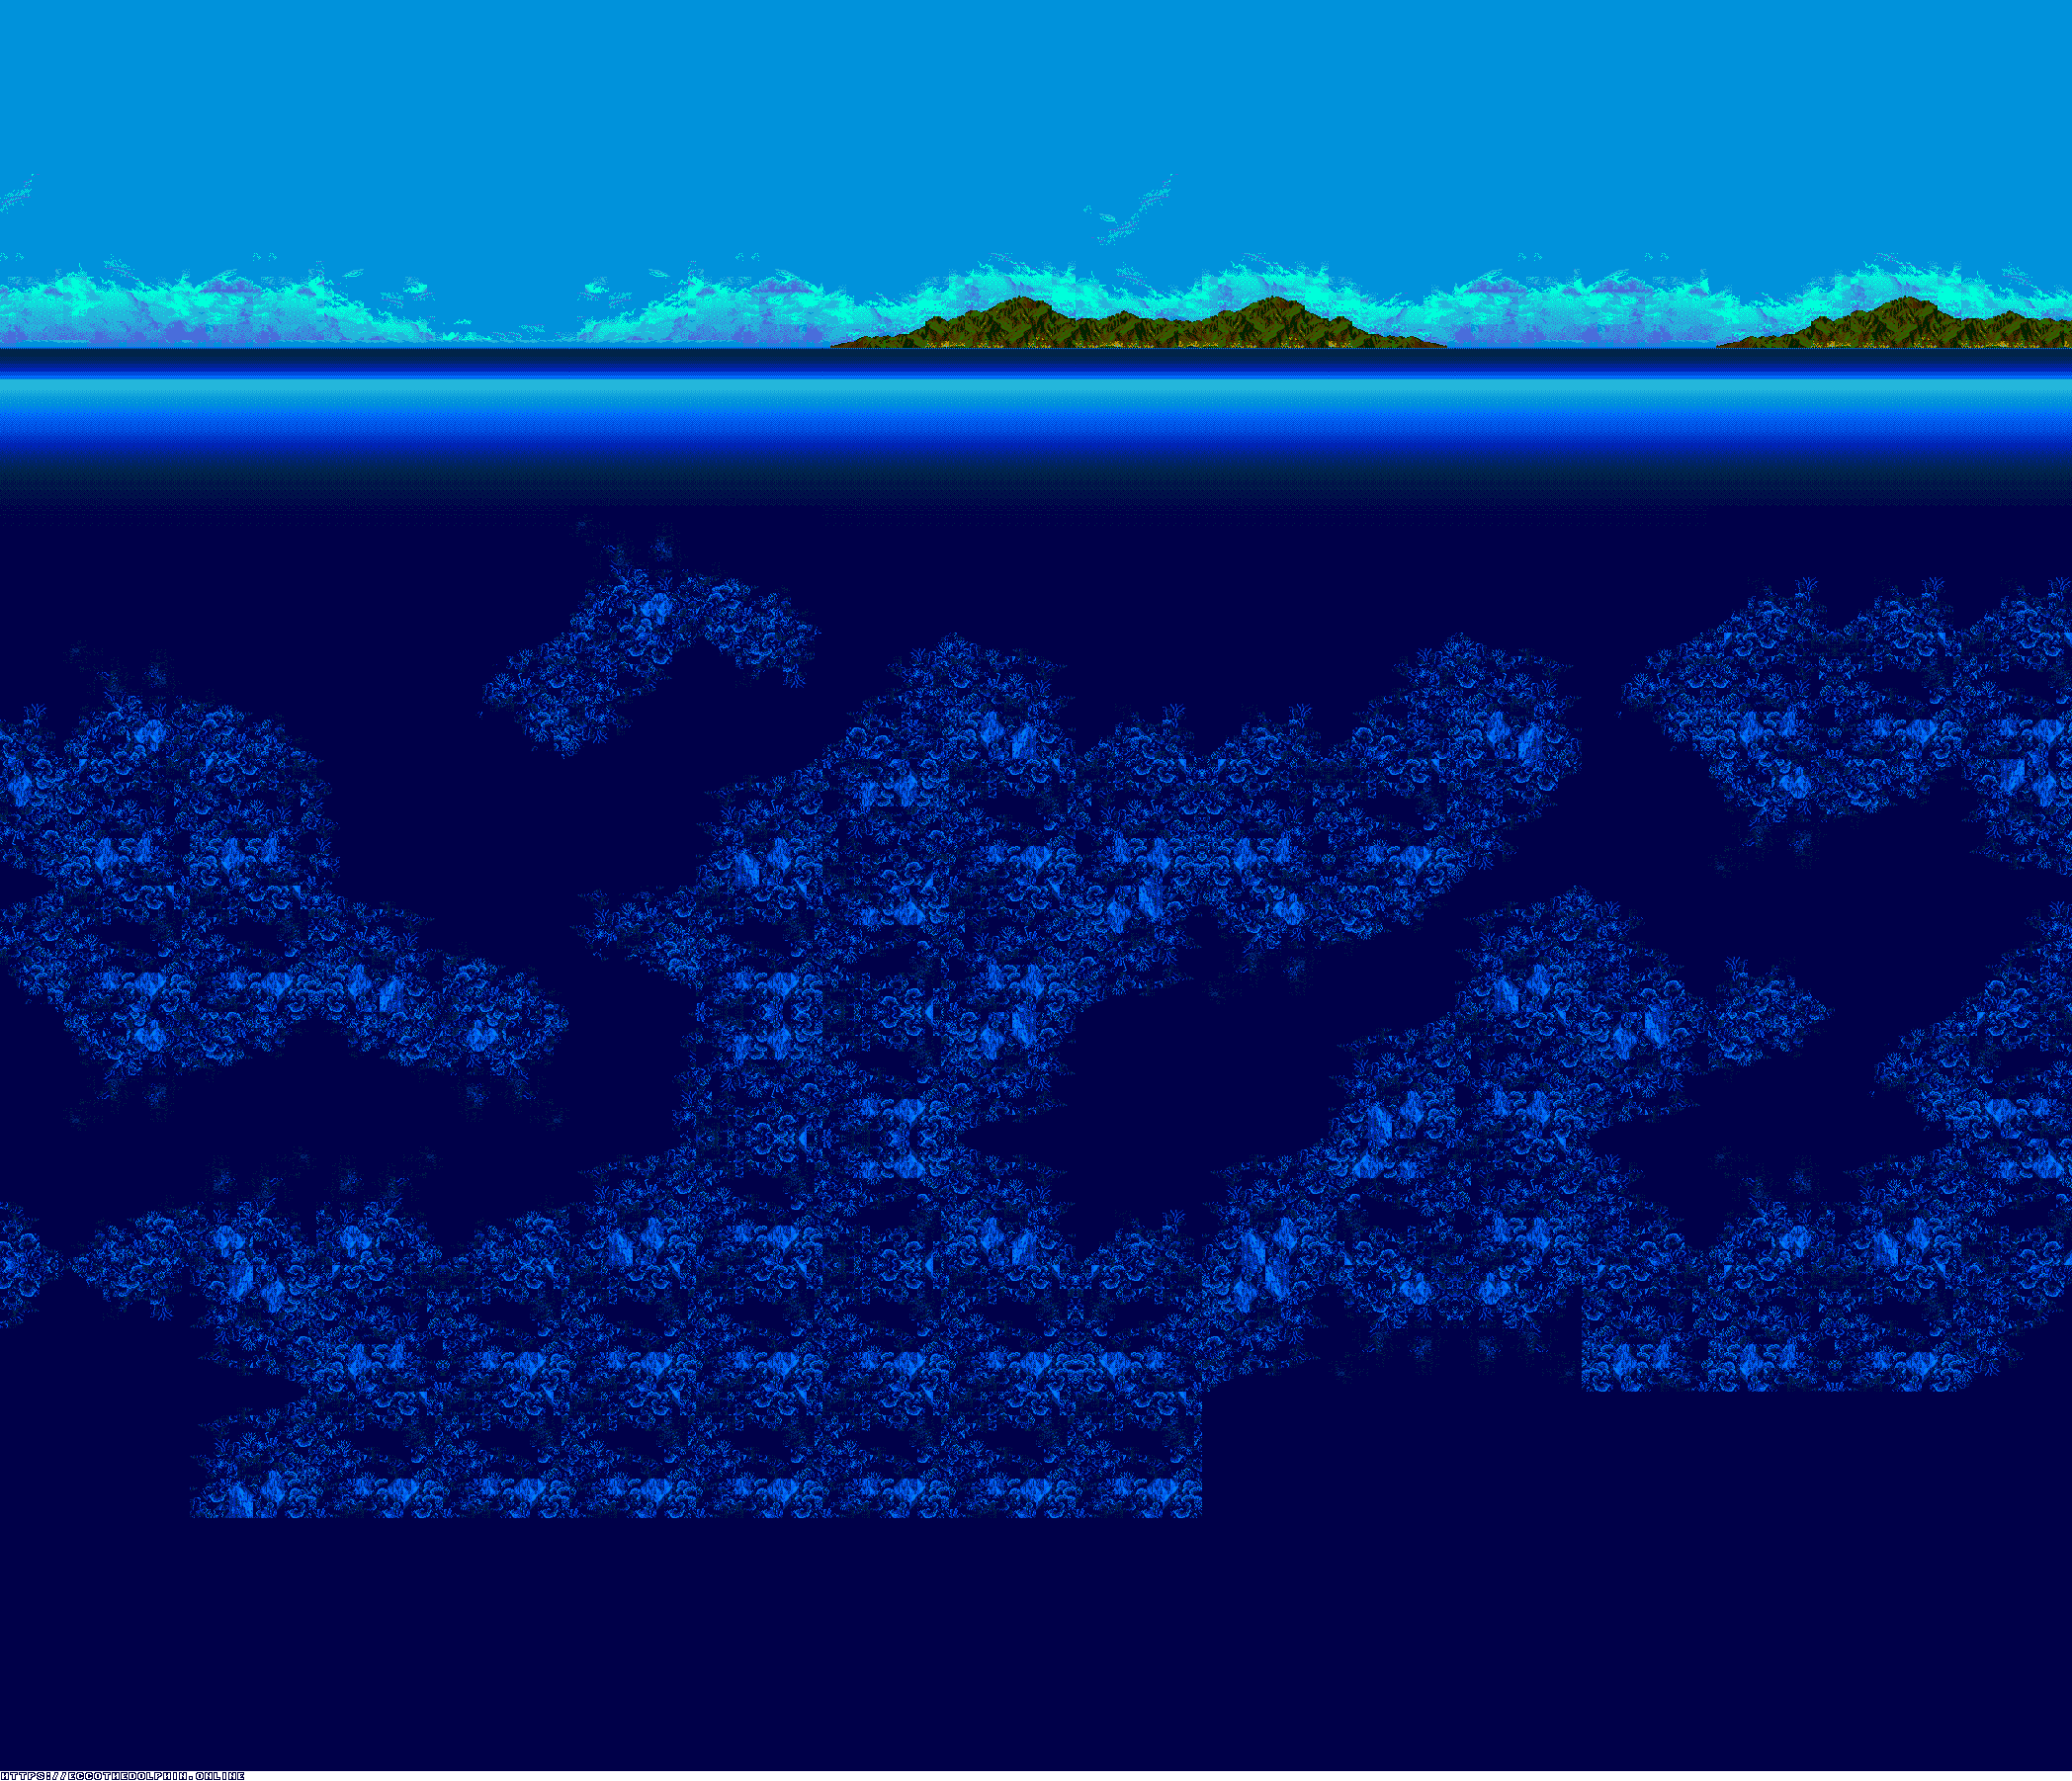 The Magical Ocean (Background)